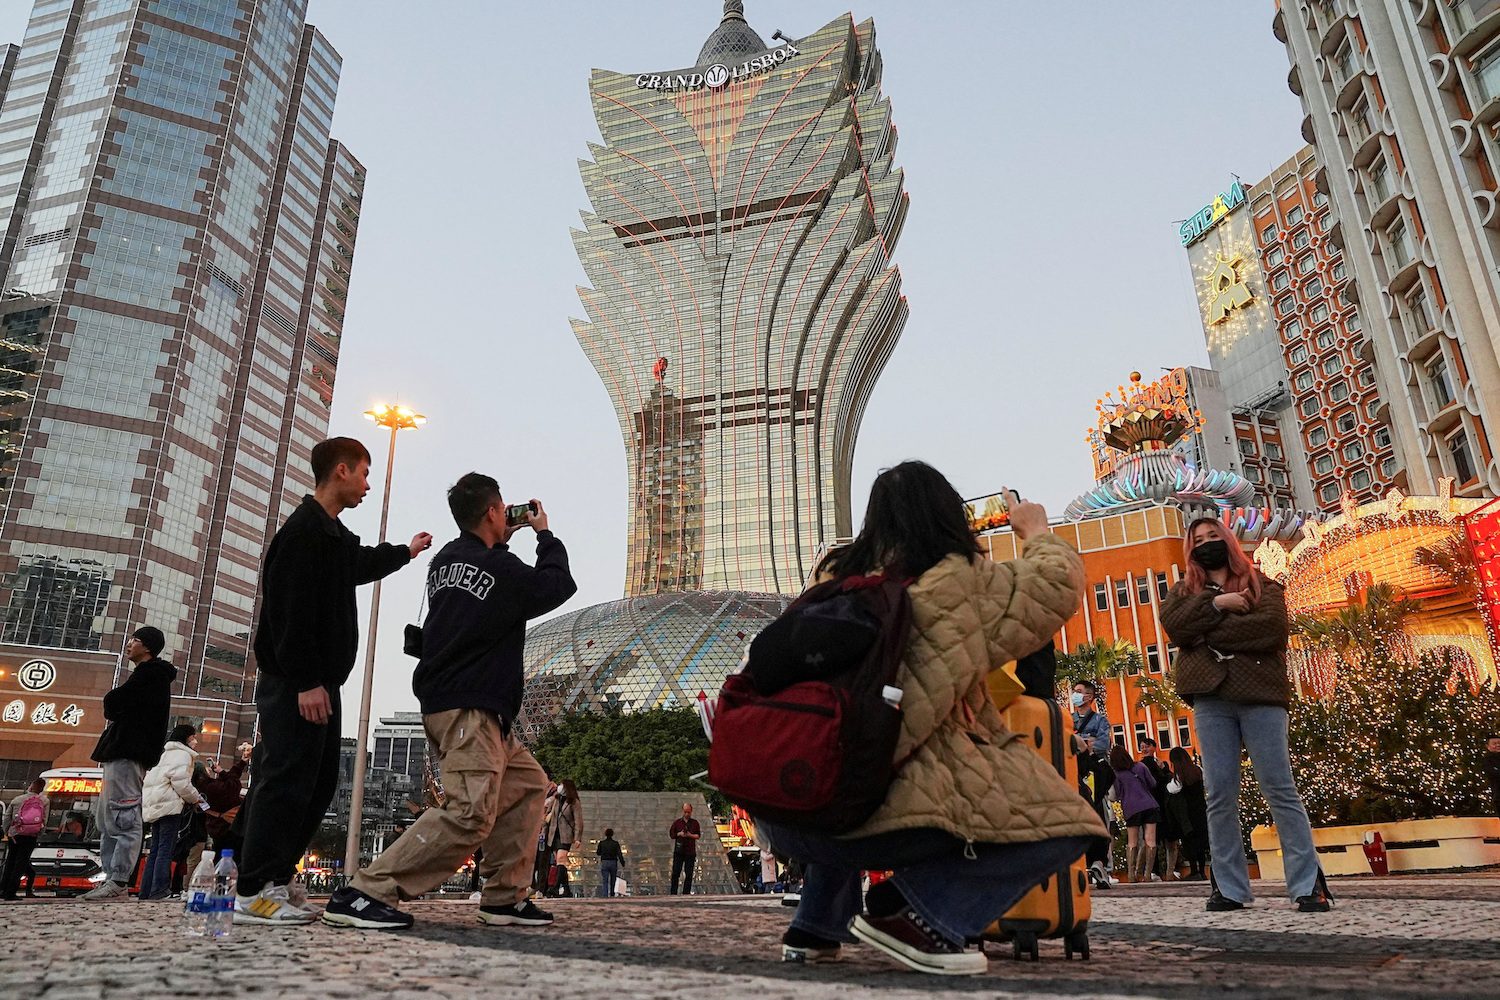 Macau casino revenues surge in January 2023 after COVID-19 rules lifted